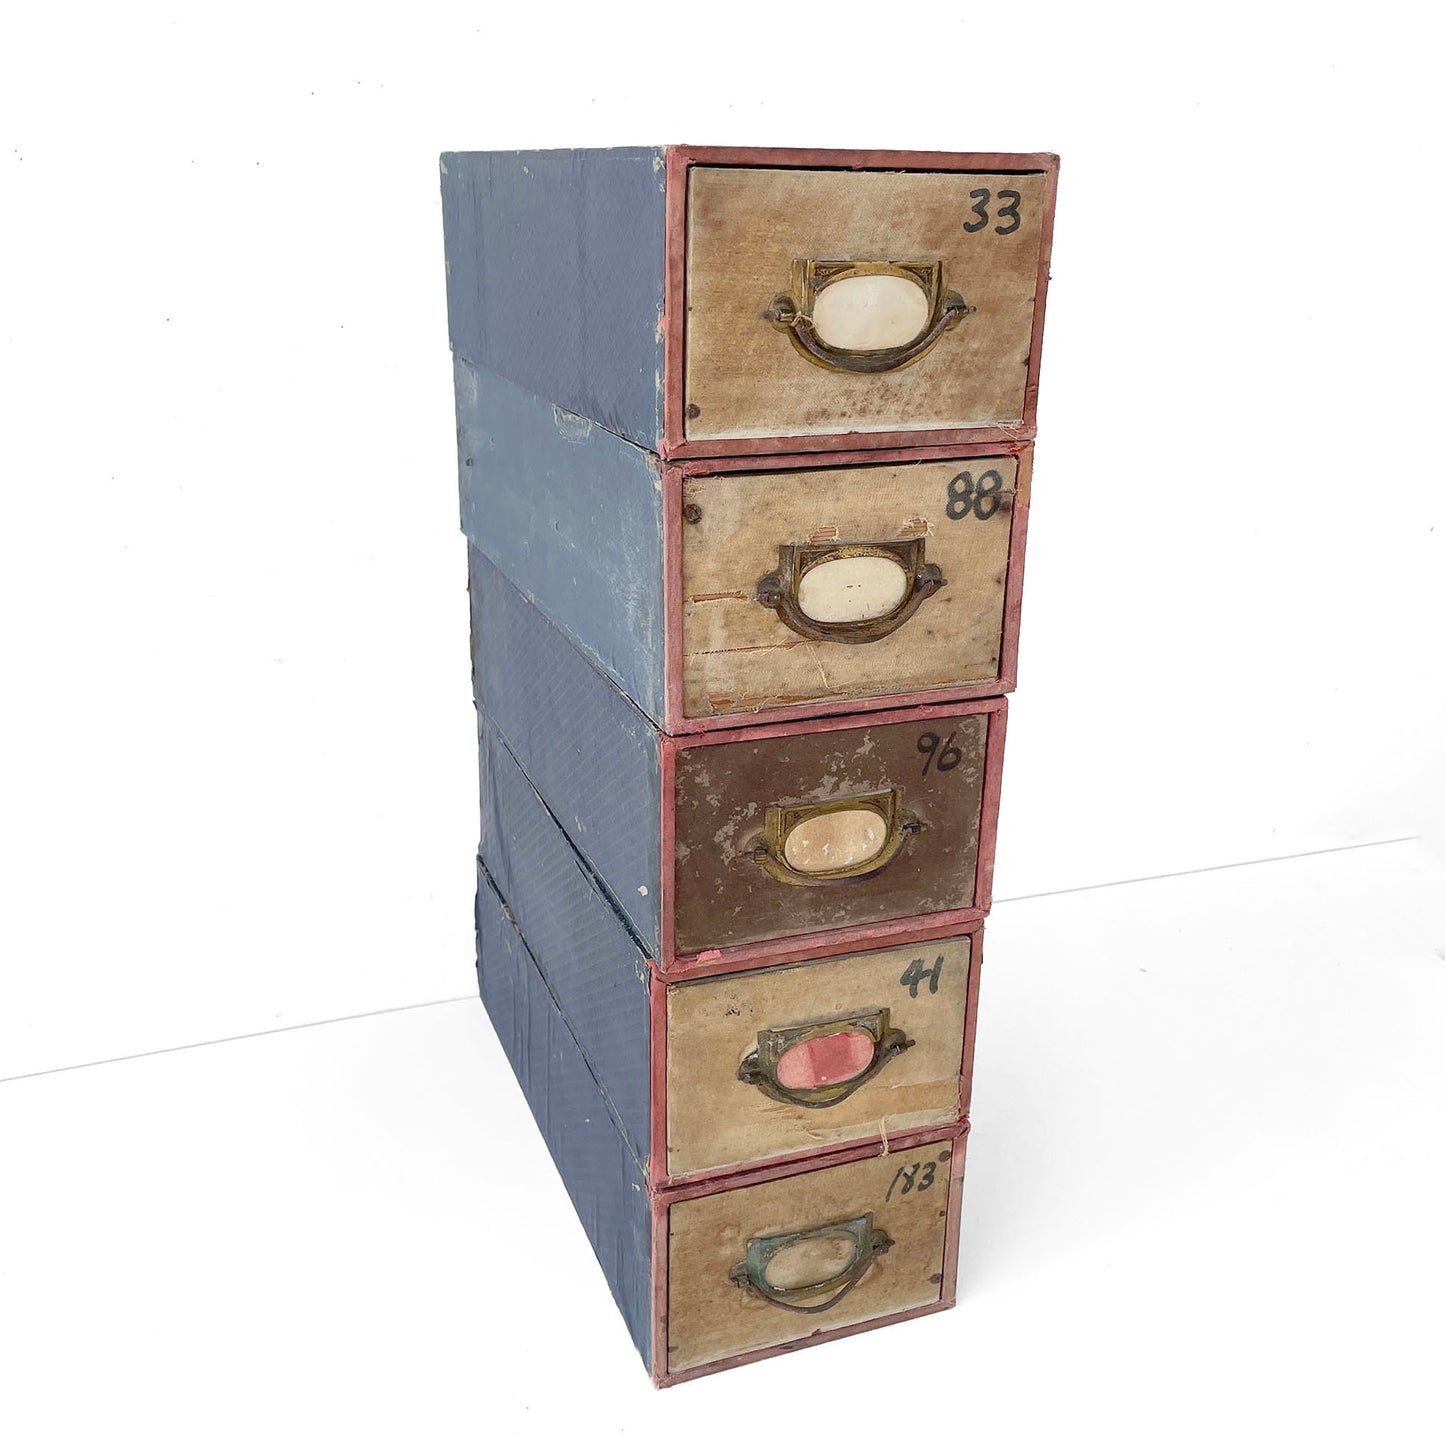 Early 20th Century French Index Card Drawer – 96